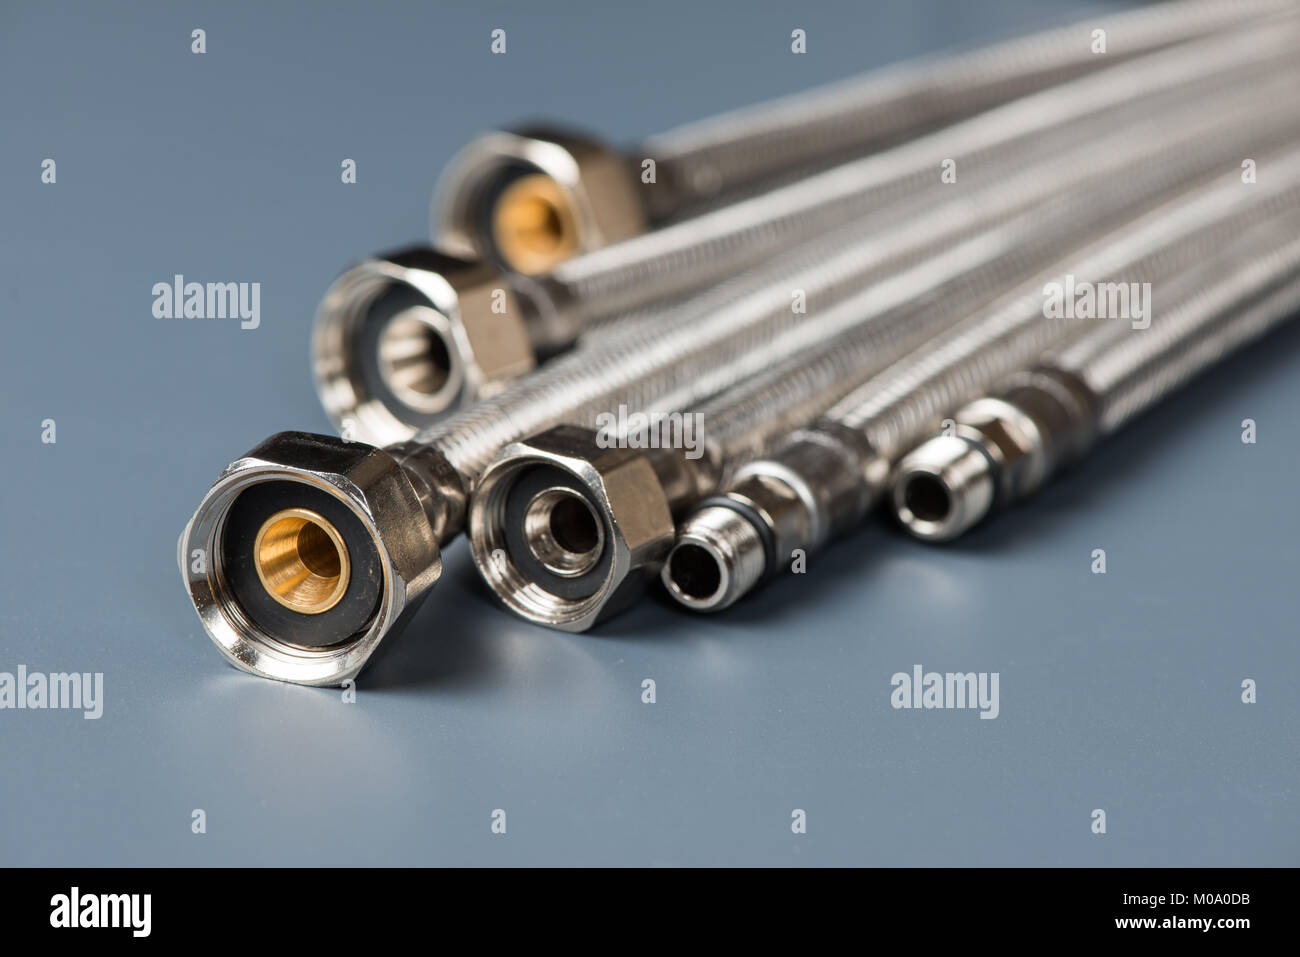 Flexible braided stainless steel water hoses on gray background Stock Photo